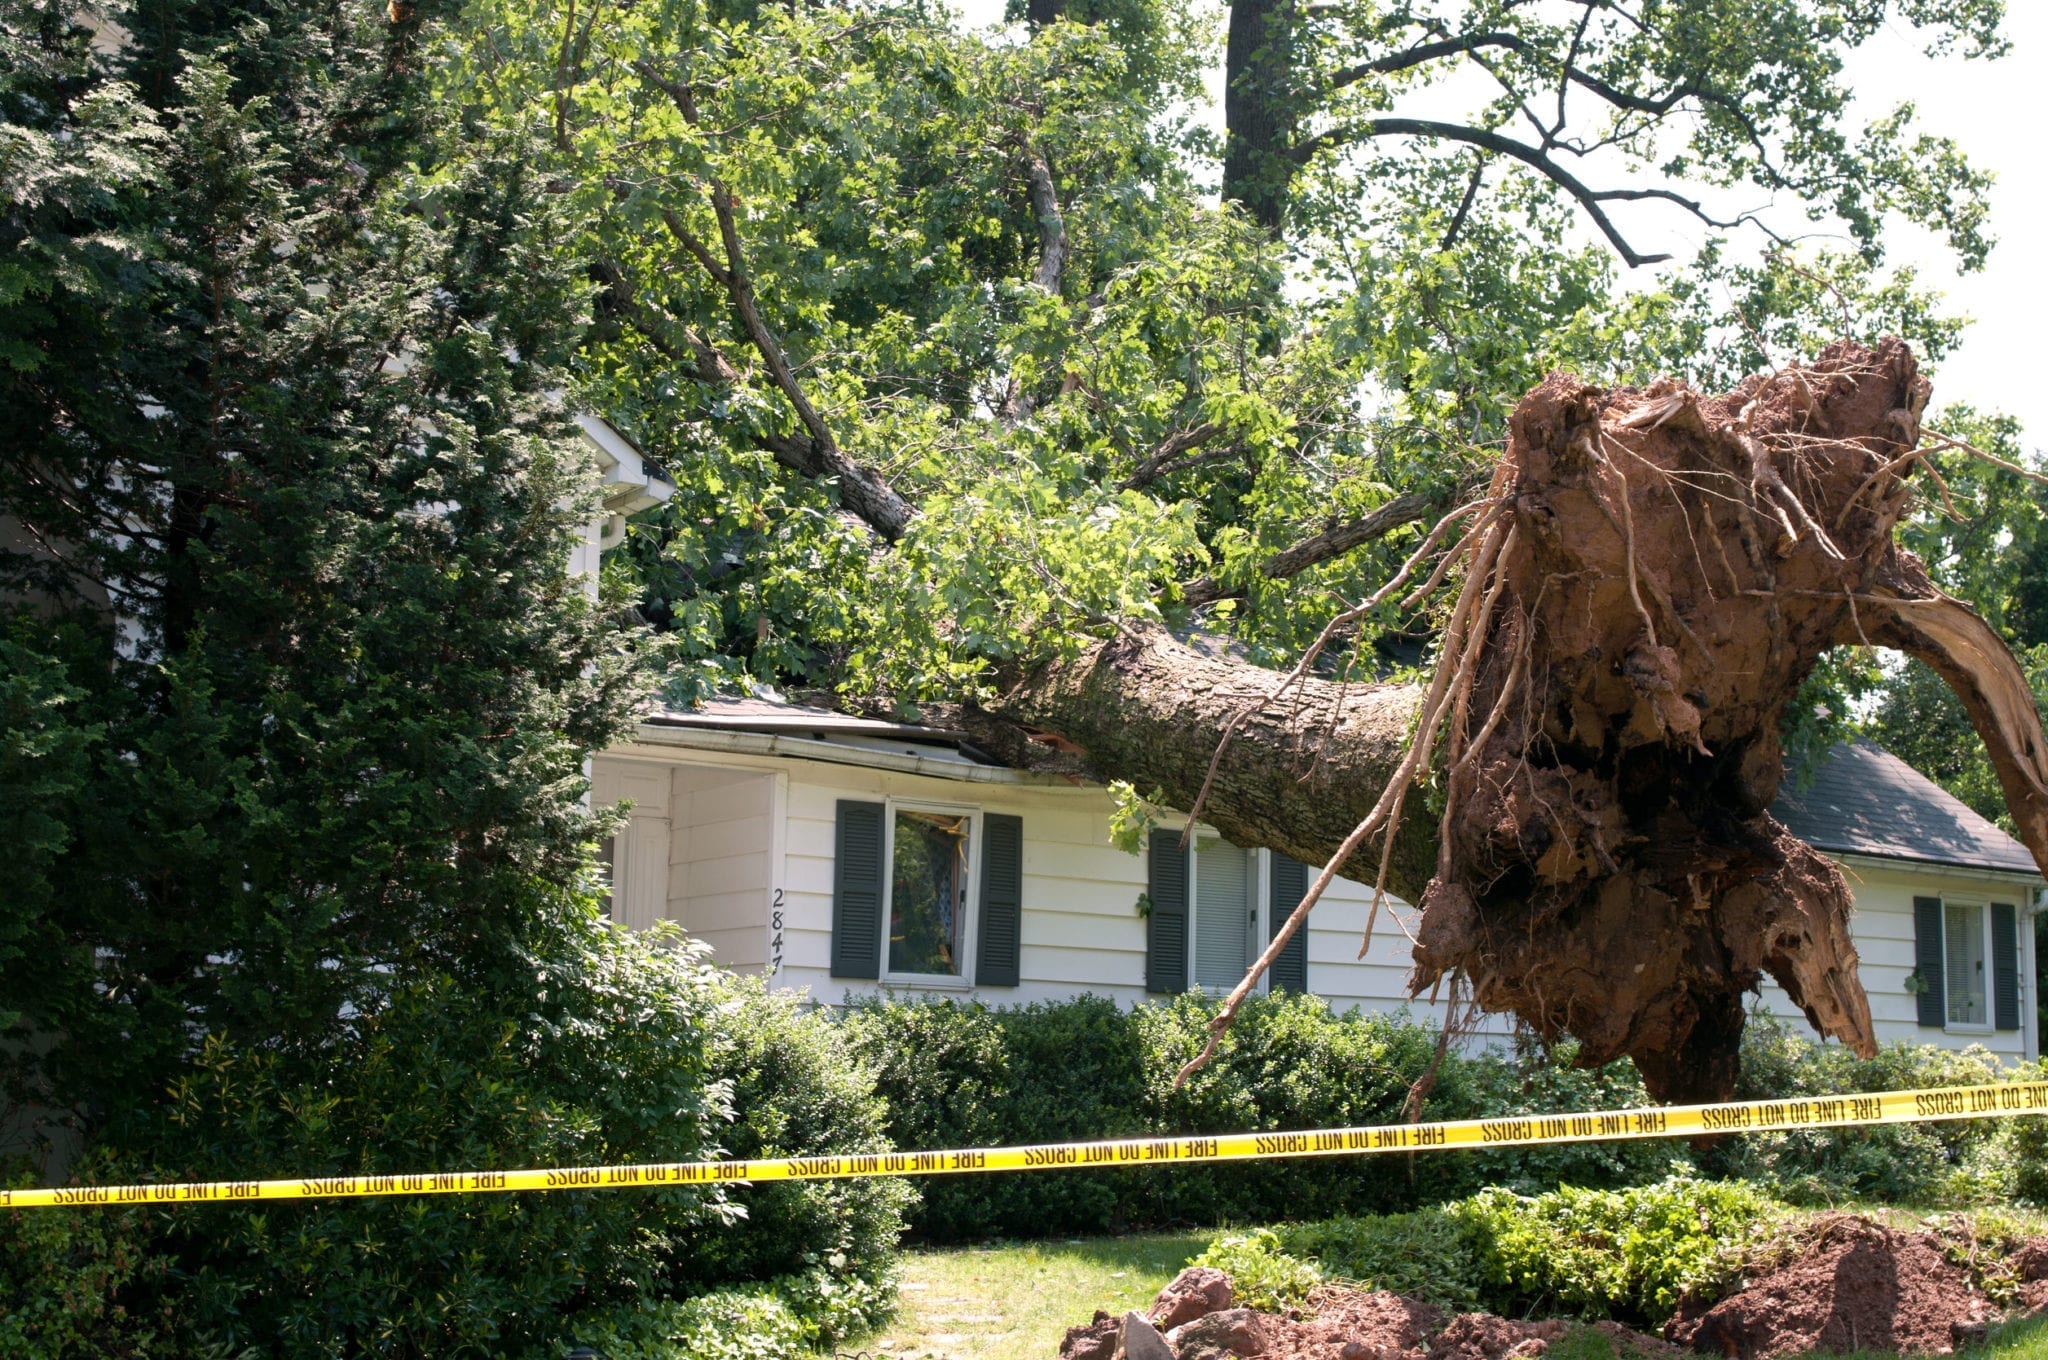 The Most Common Types of Property Damage Floridians Should Watch For